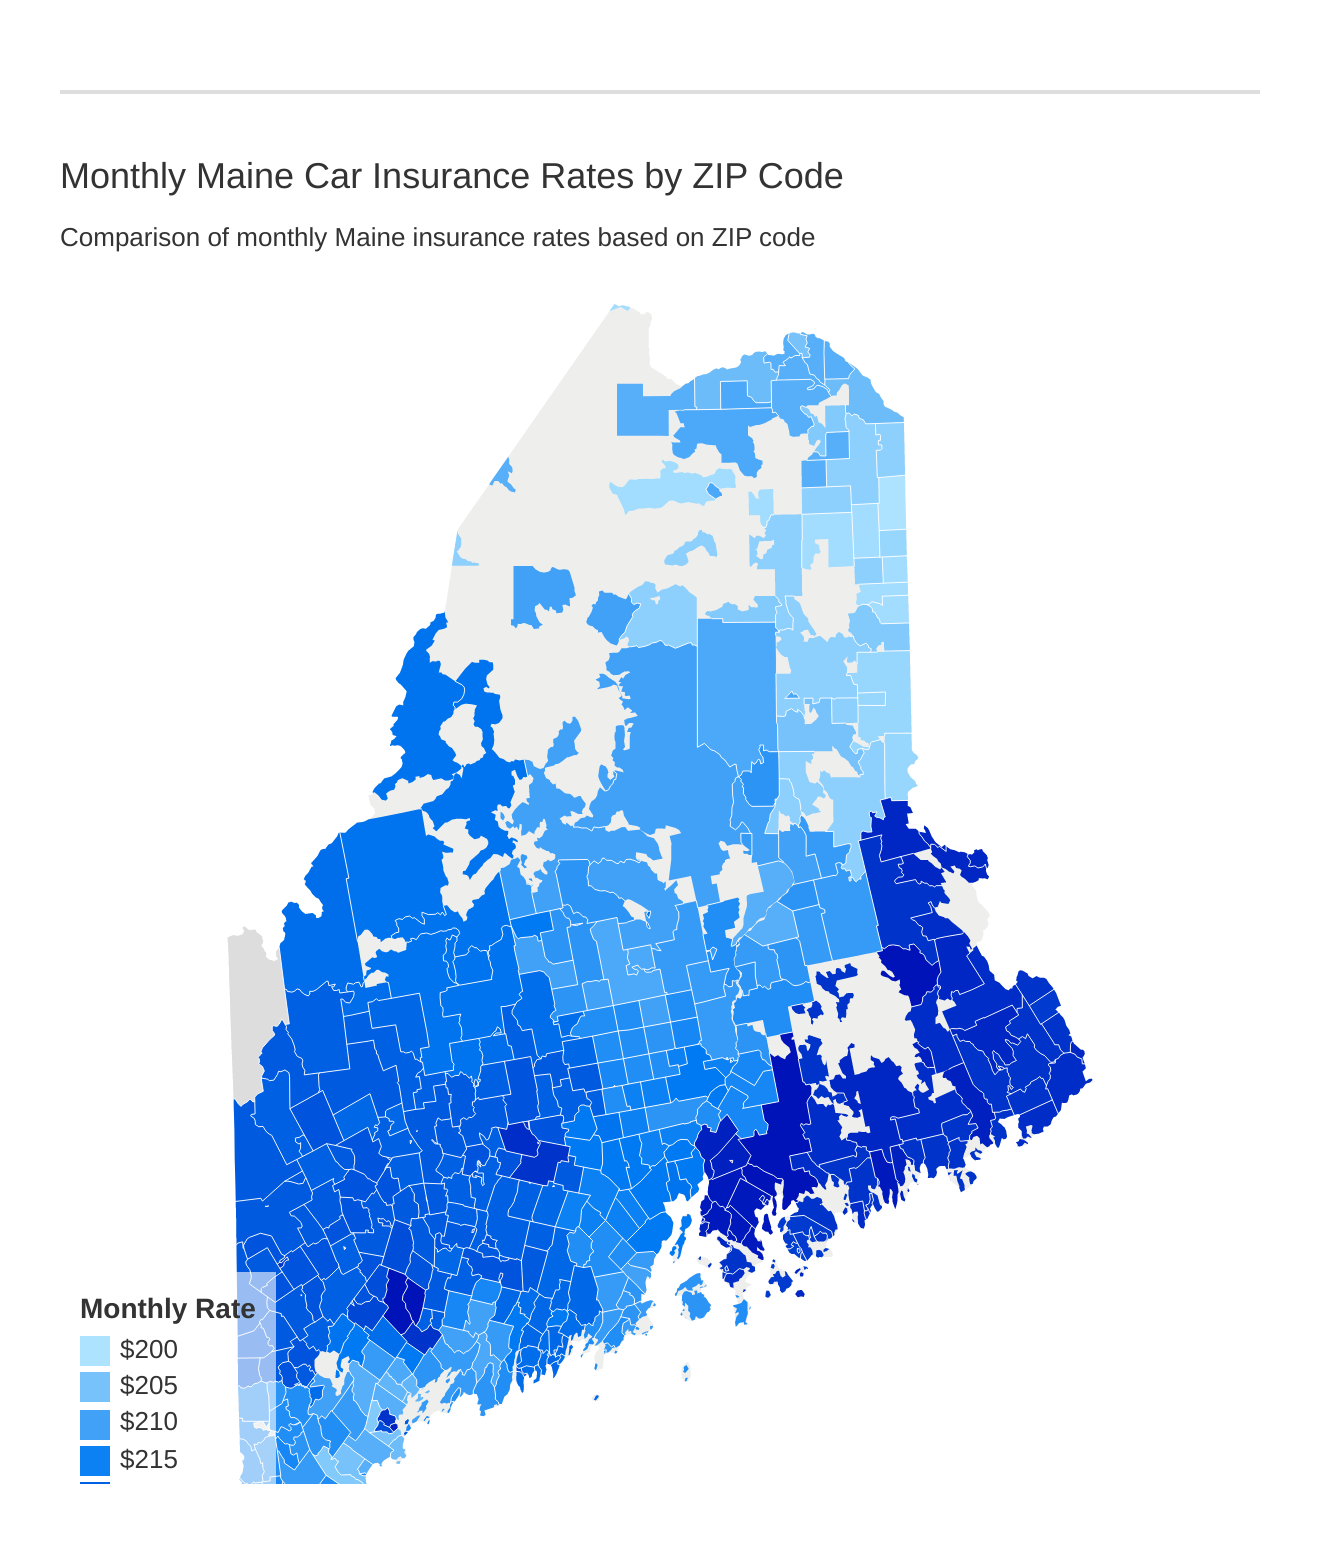 Monthly Maine Car Insurance Rates by ZIP Code